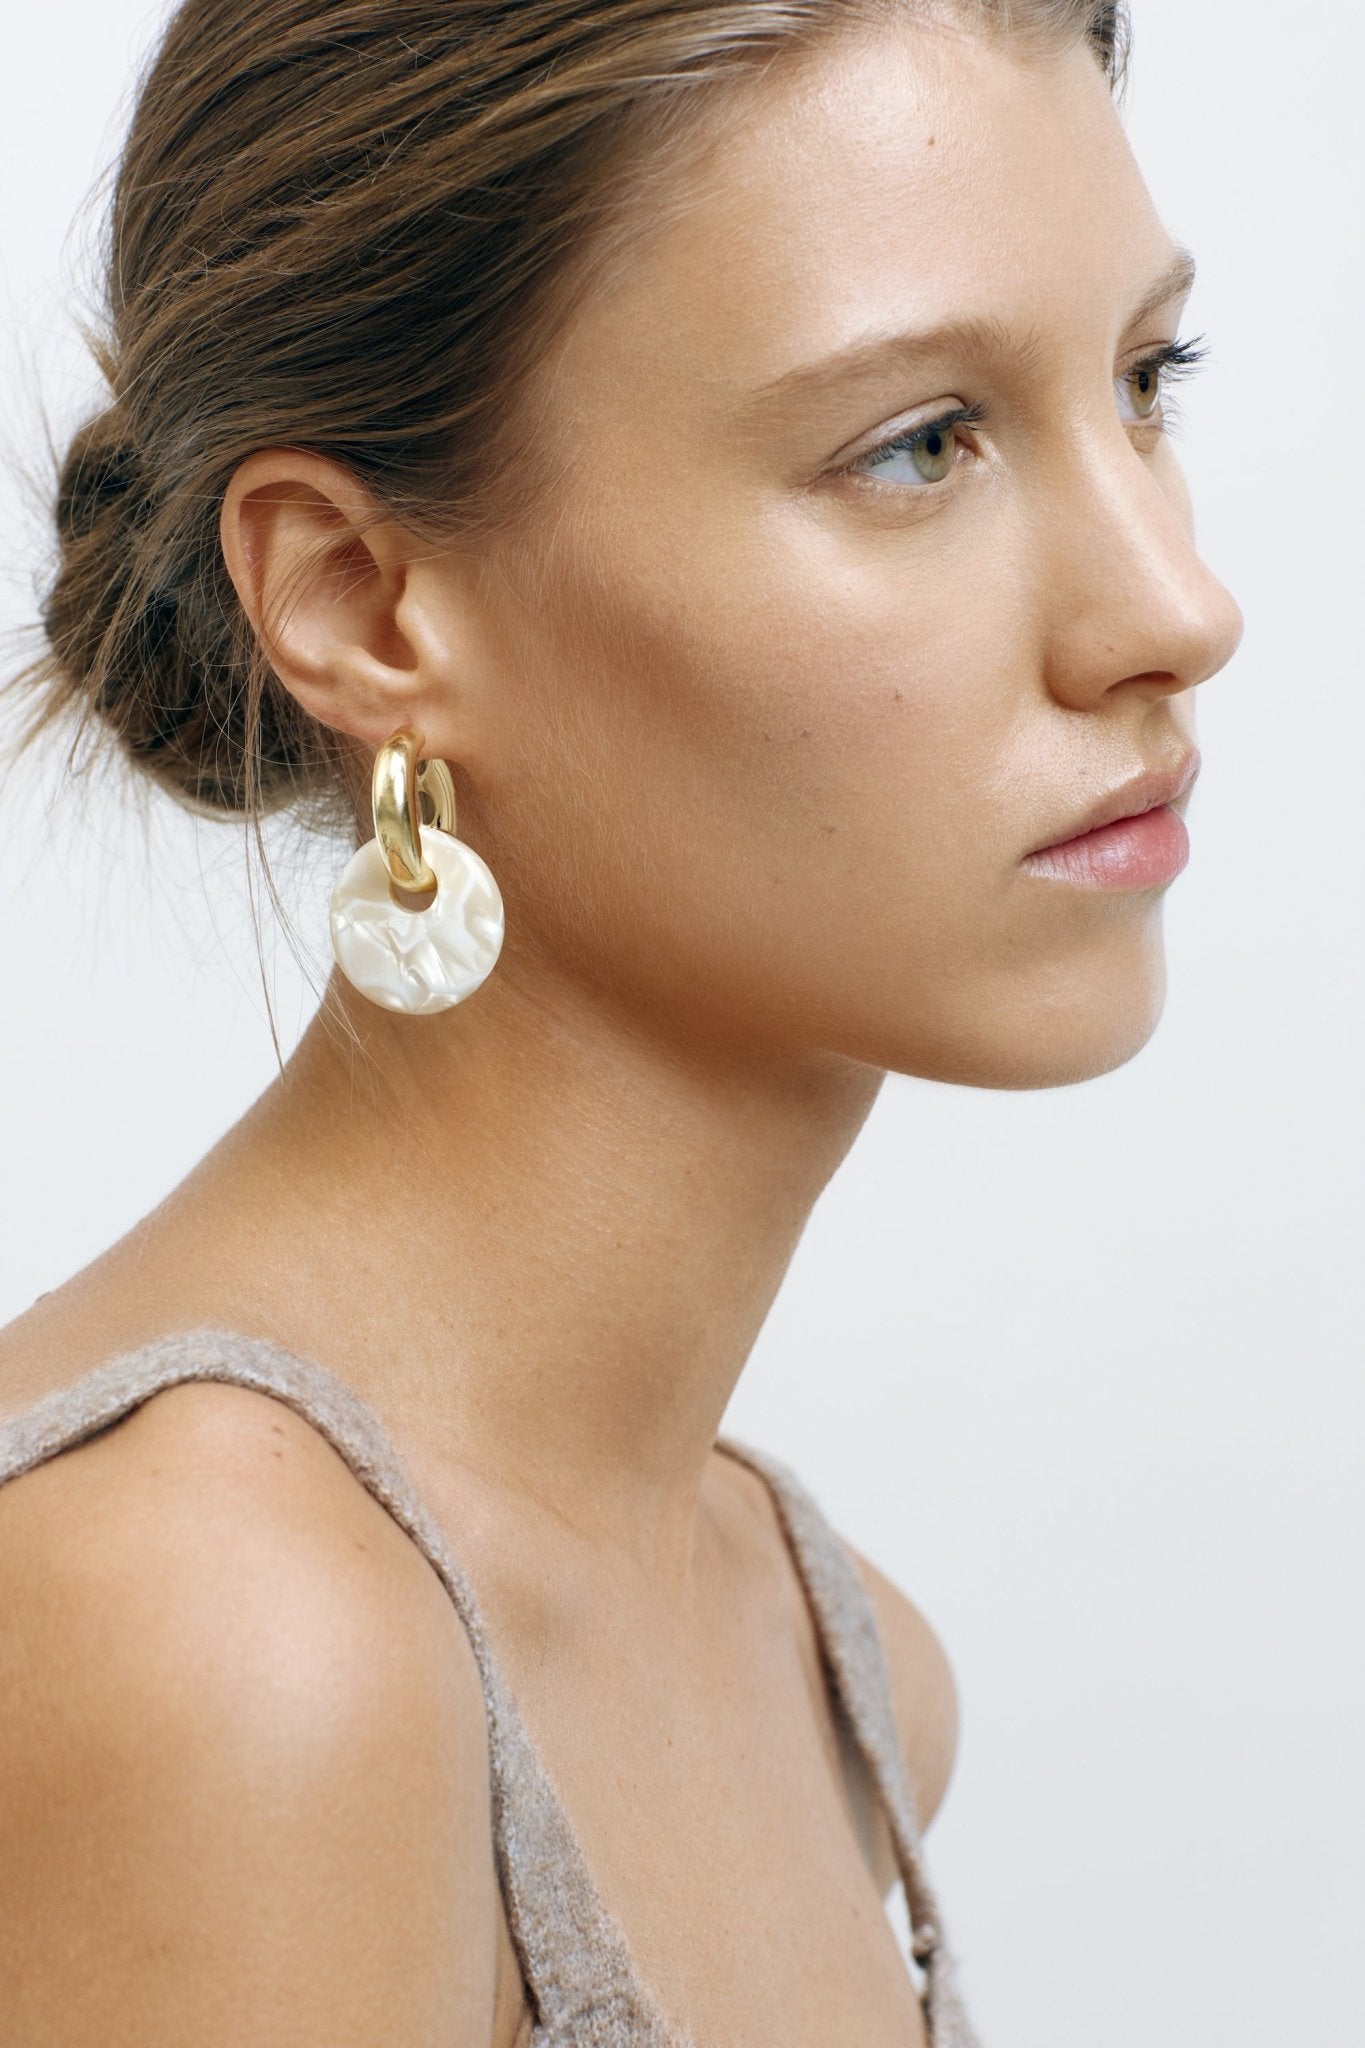 Disc Earring Charms in Canyon Brown